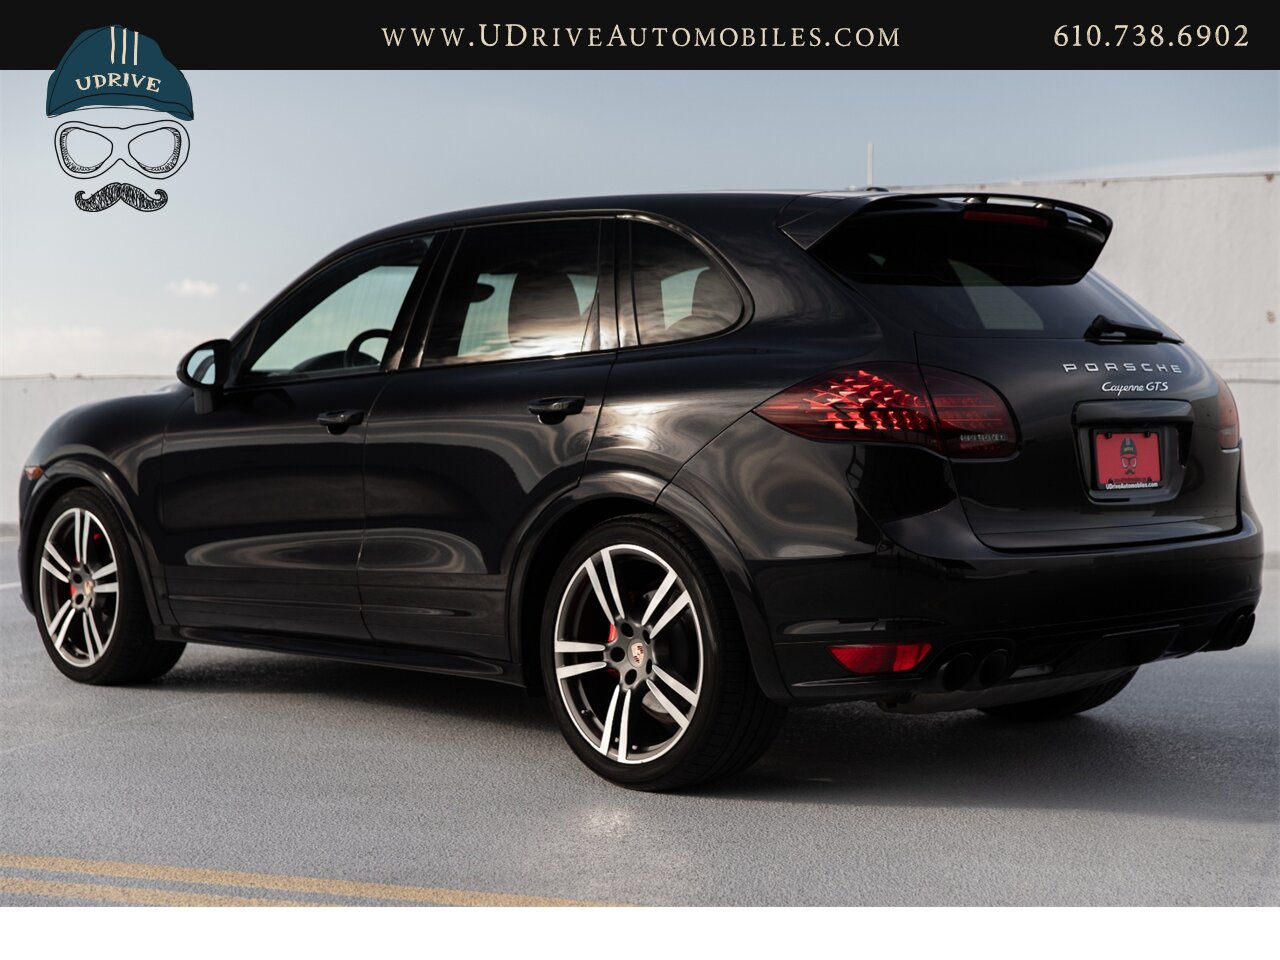 2013 Porsche Cayenne GTS Service History 1 Owner 21in Wheels  Espresso / Cognac Two Tone Leather - Photo 24 - West Chester, PA 19382